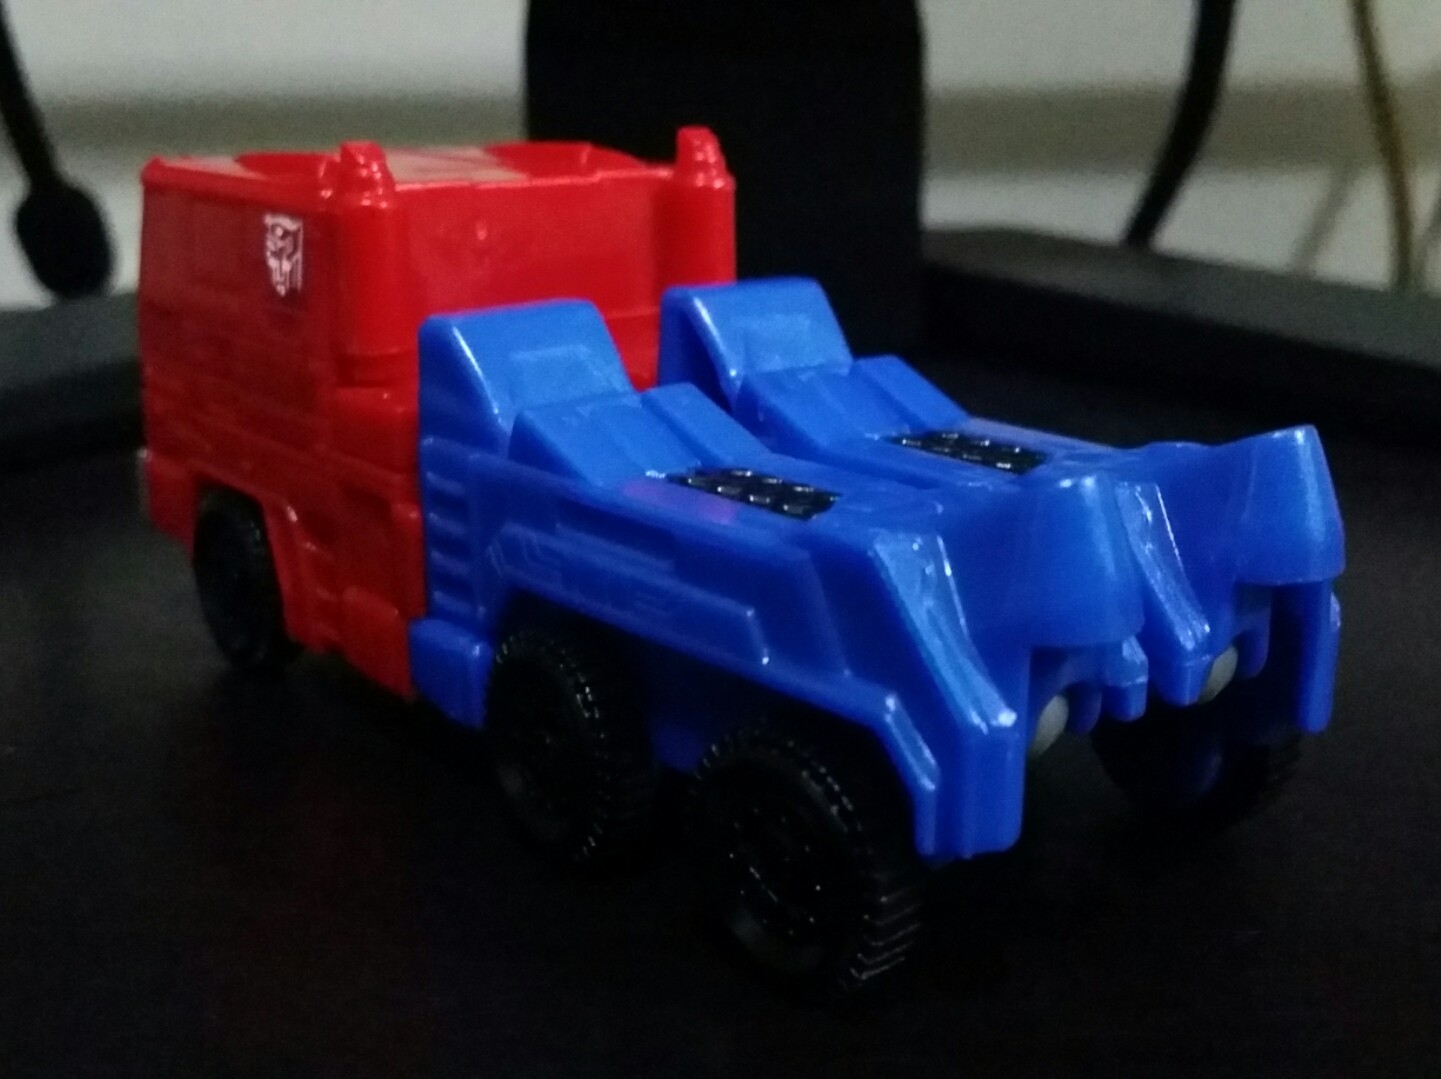 Transformers News: First In Hand Images of New Transformers 4.5" Optimus Prime Figure